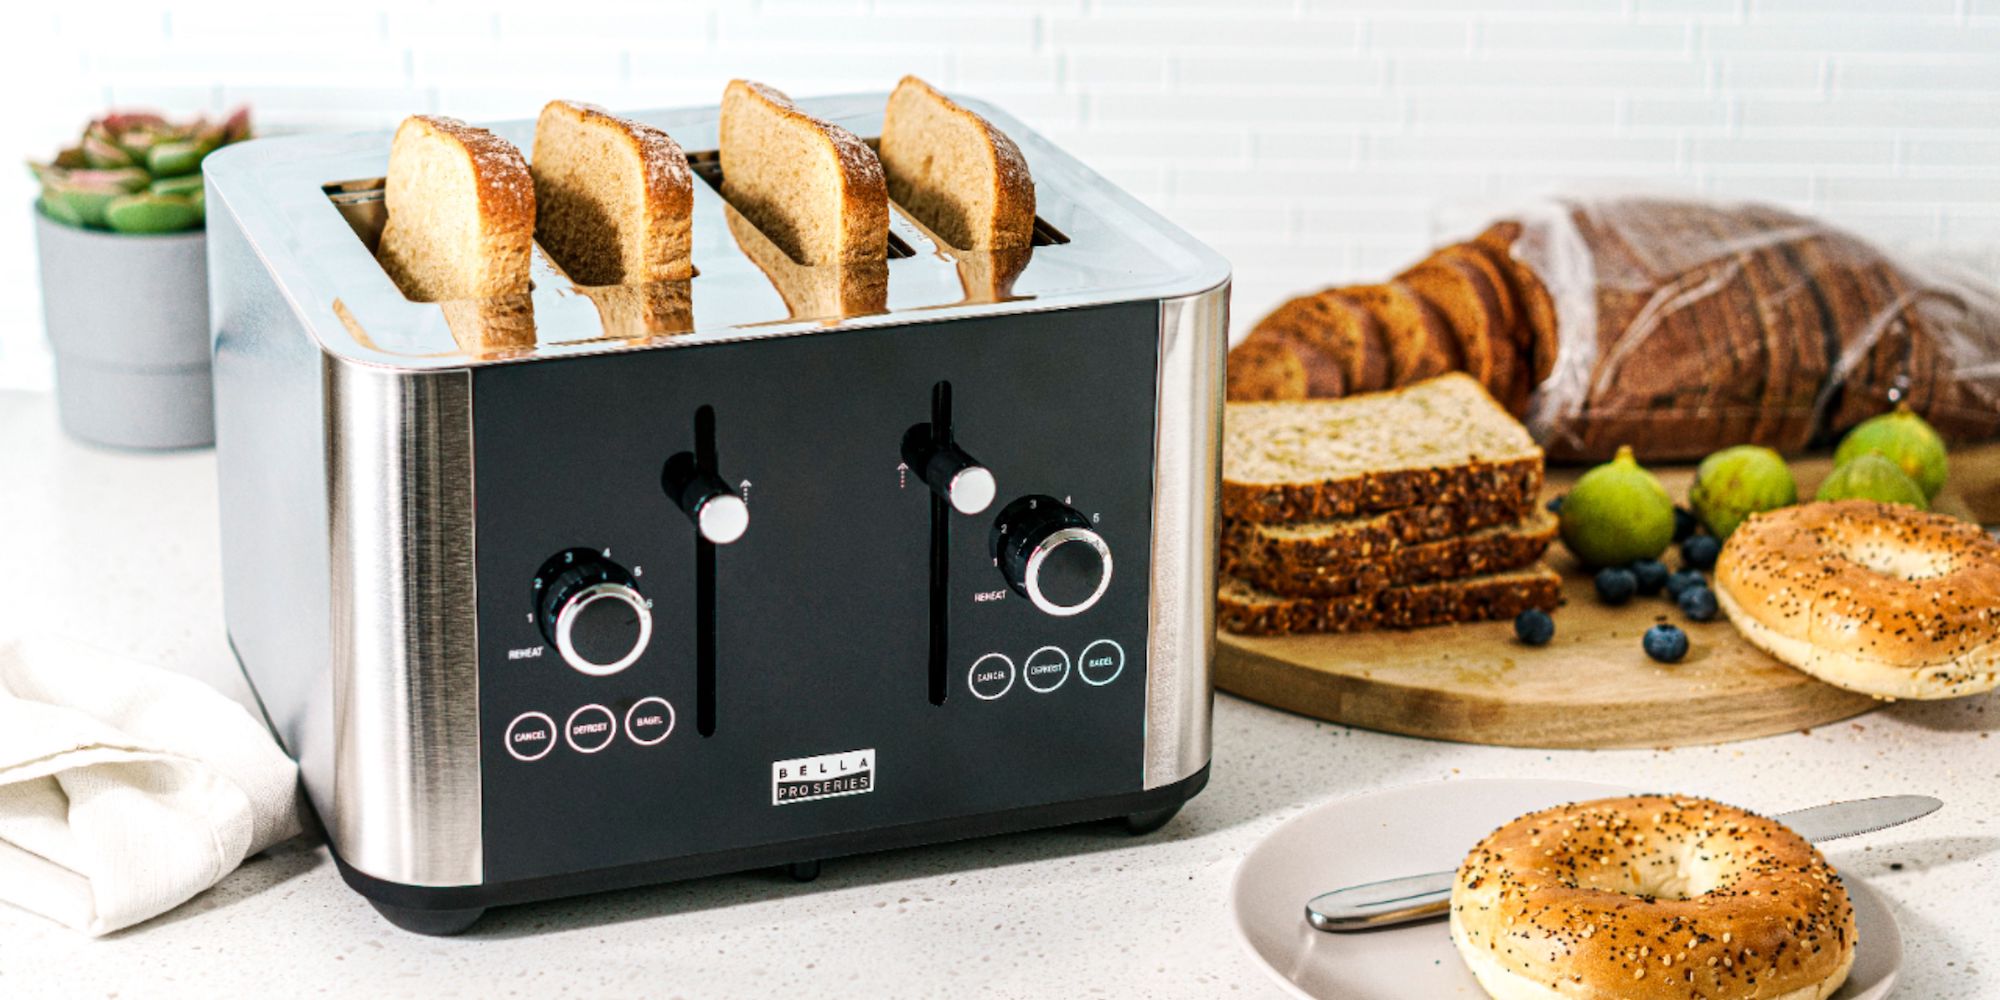 https://9to5toys.com/wp-content/uploads/sites/5/2021/04/Bella-Pro-Series-4-Slice-Digital-Touchscreen-Toaster-in-stainless-steel.jpeg